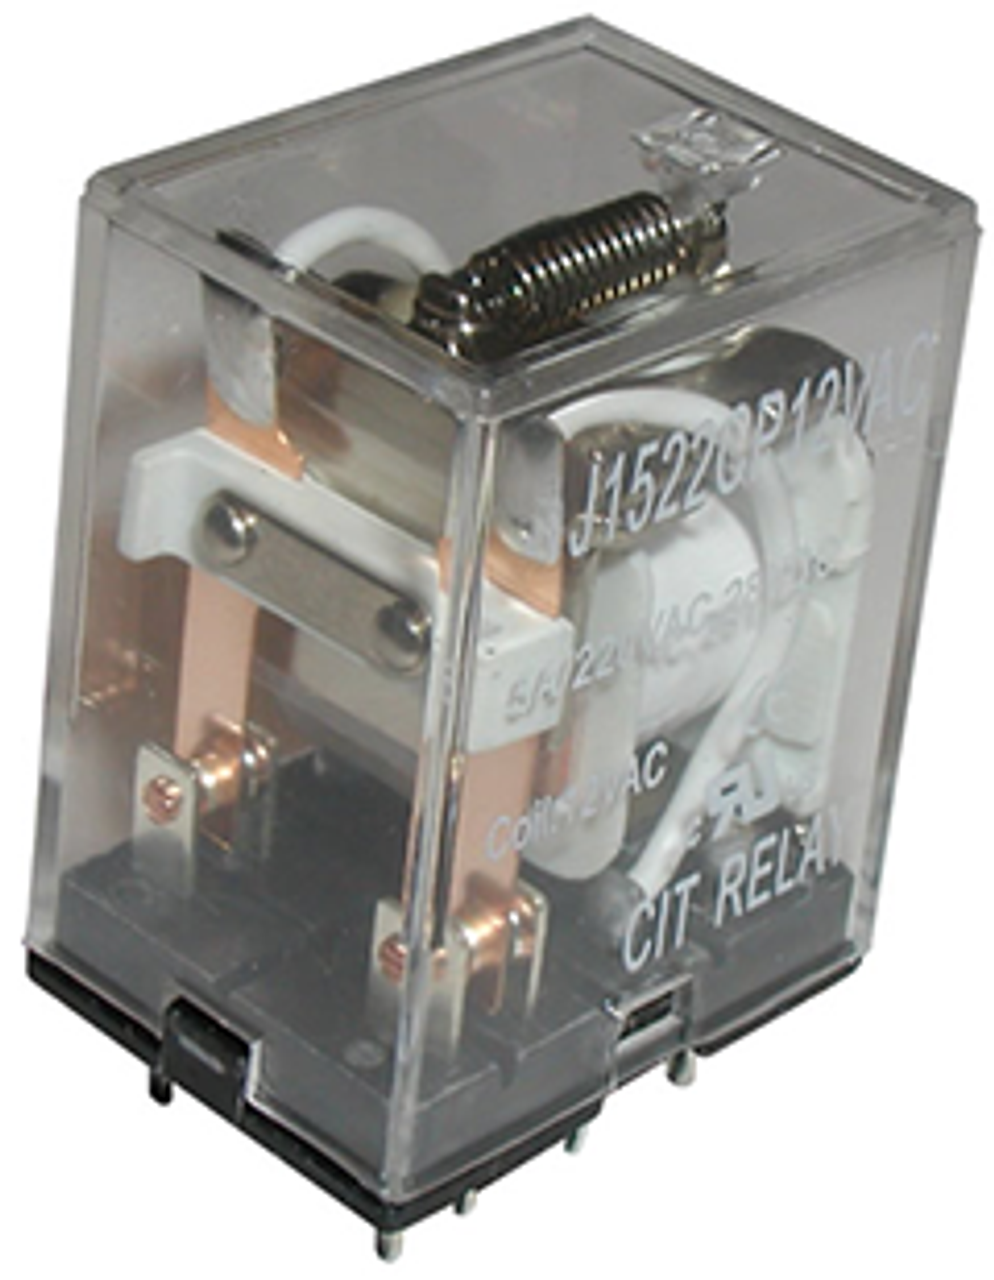 CIT Relay and Switch J1524CP220VAC Industrial Relays